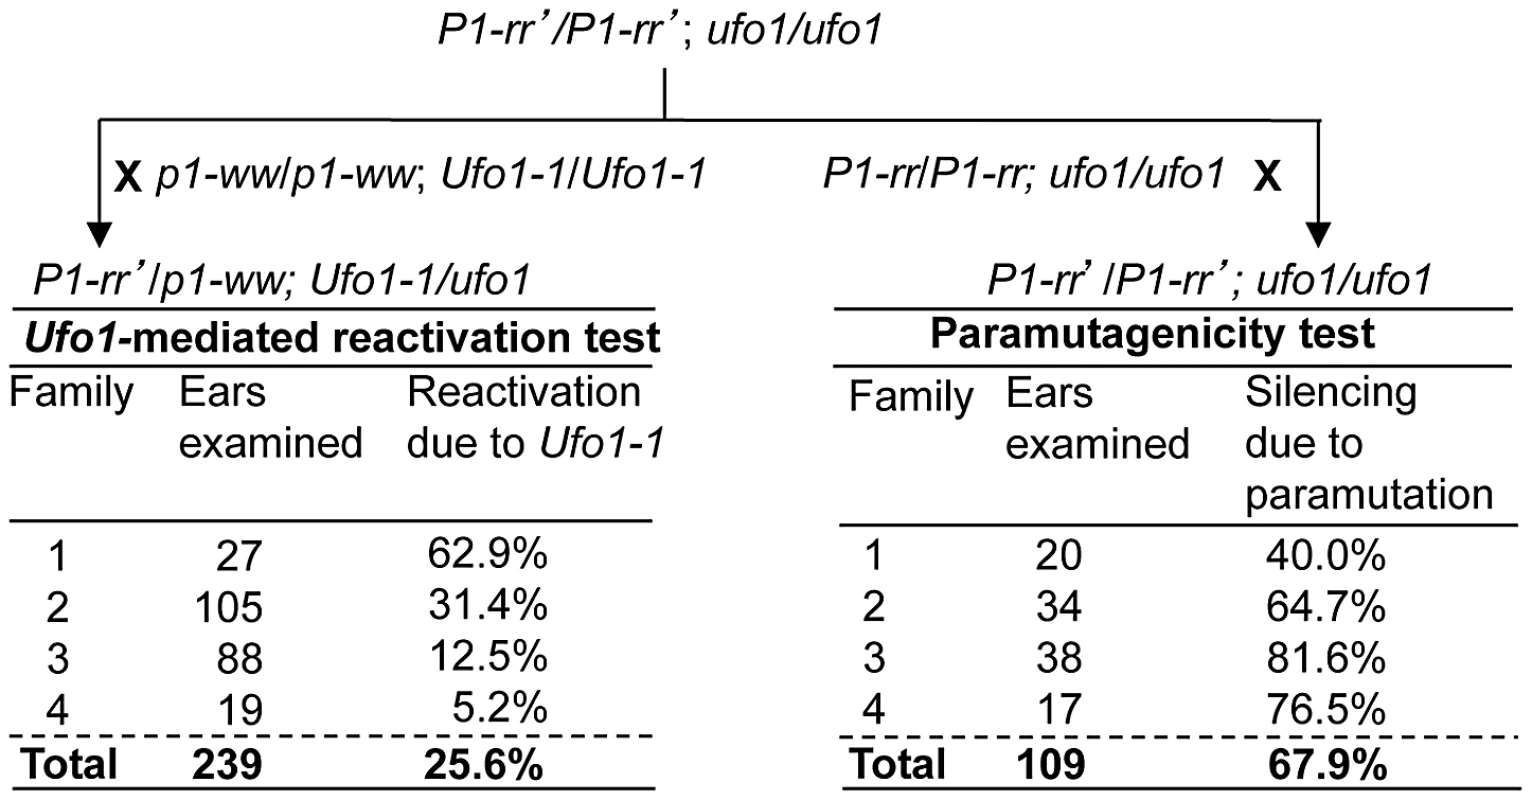 Paramutagenicity of <i>P1-rr′</i> inversely correlates with frequency of reactivation by <i>Ufo1-1</i>.